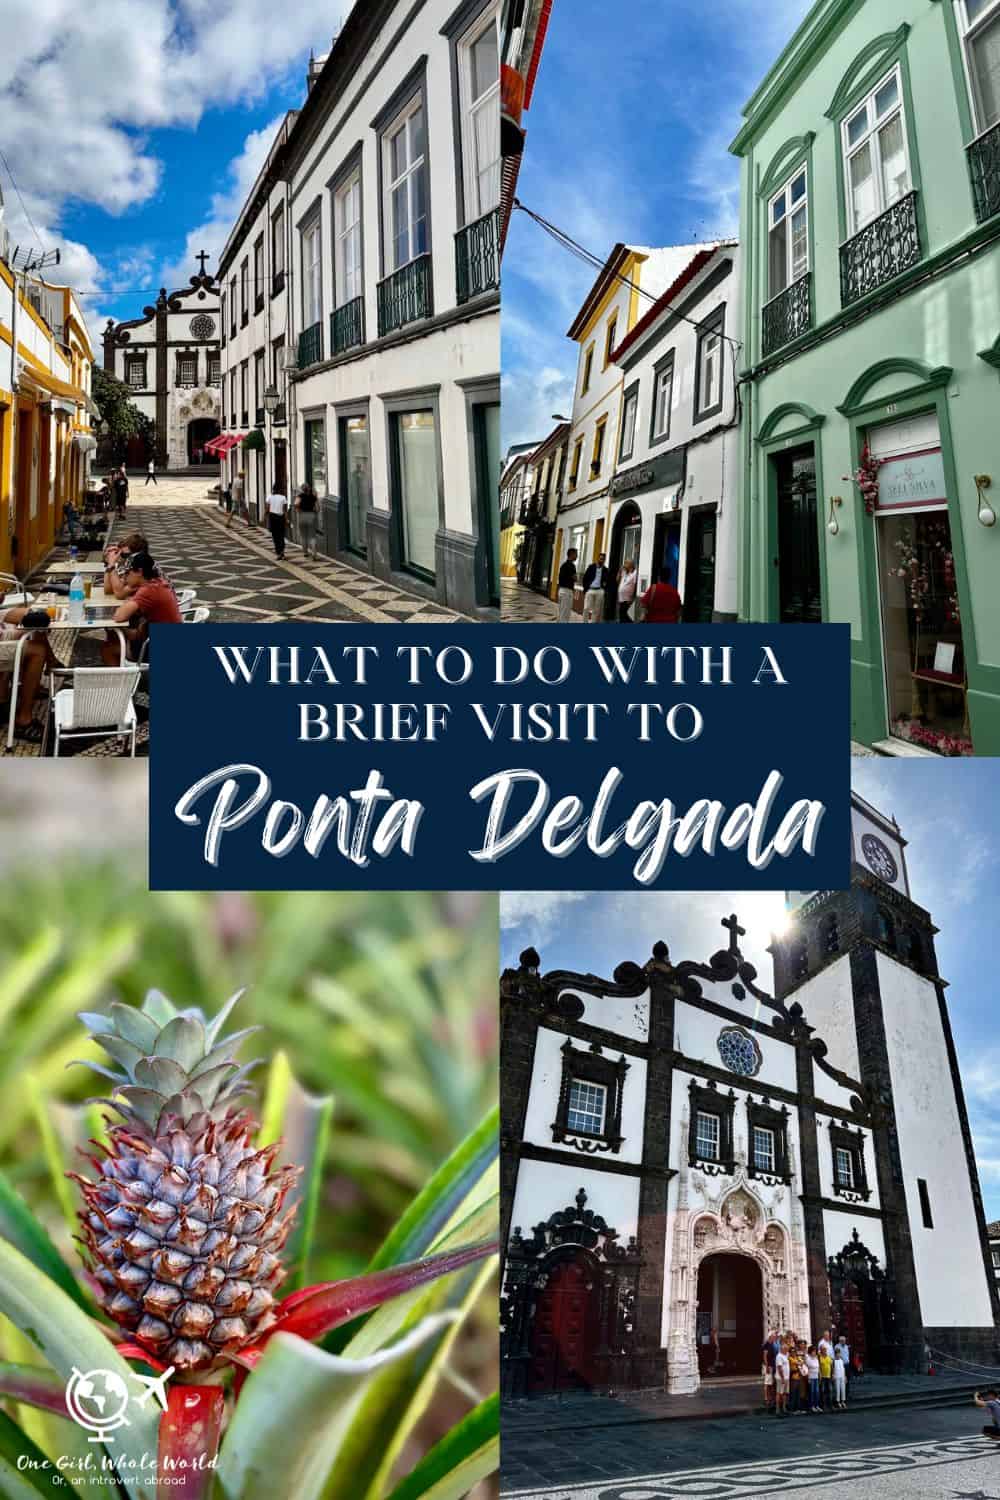 How to Spend a Short Time in Ponta Delgada (Azores) | Sao Miguel's biggest city is a vibrant, photogenic medieval town full of narrow streets & beautiful buildings. It's a great place to spend a few hours, & a base for exploring...things to do in Ponta Delgada, what to do in the Azores Islands, Azores itinerary ideas! #azores #portugal